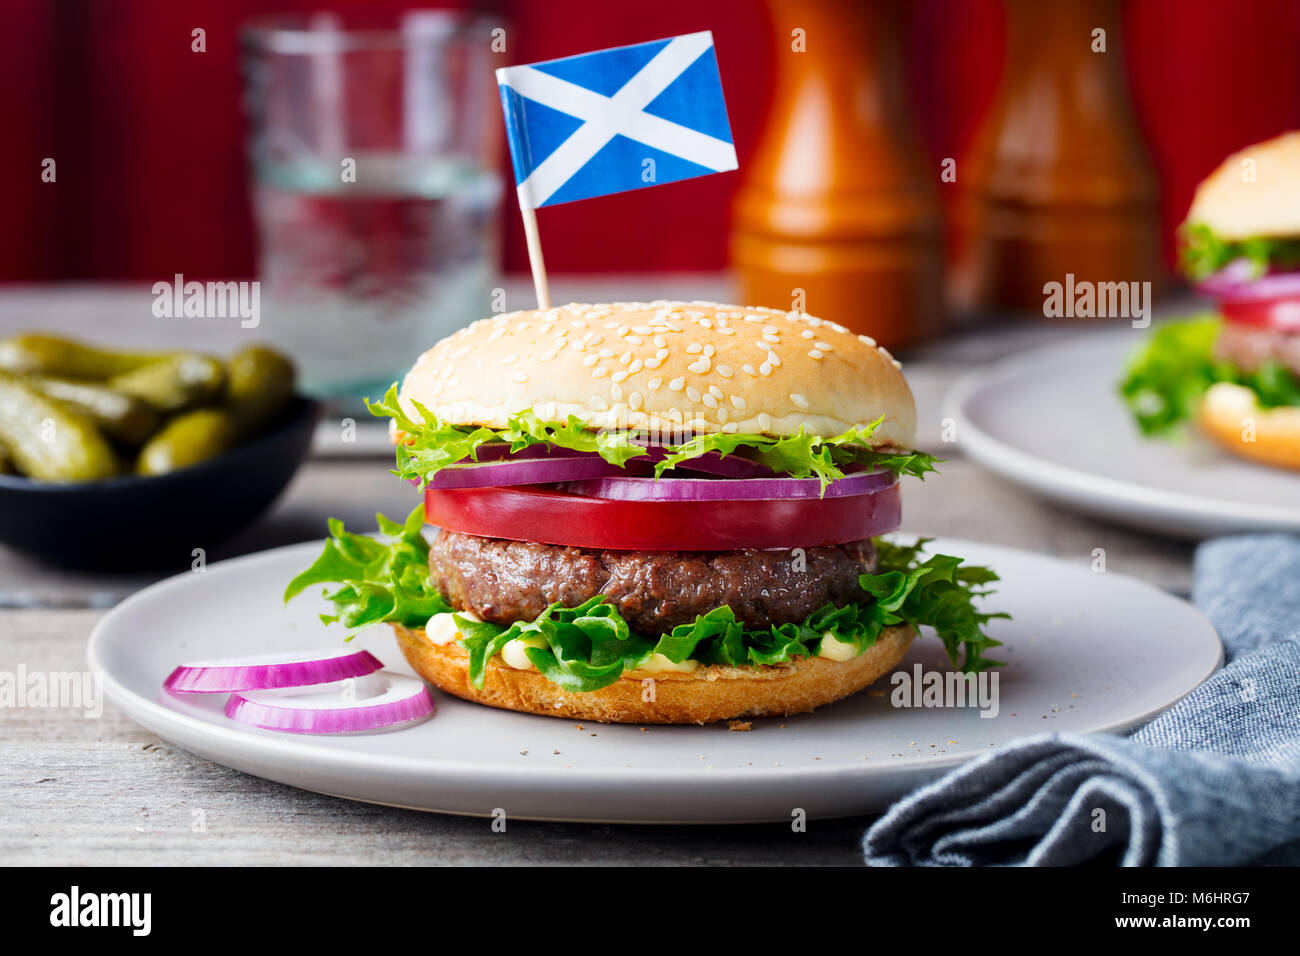 Burger on a plate with pickles. Wooden background. Stock Photo